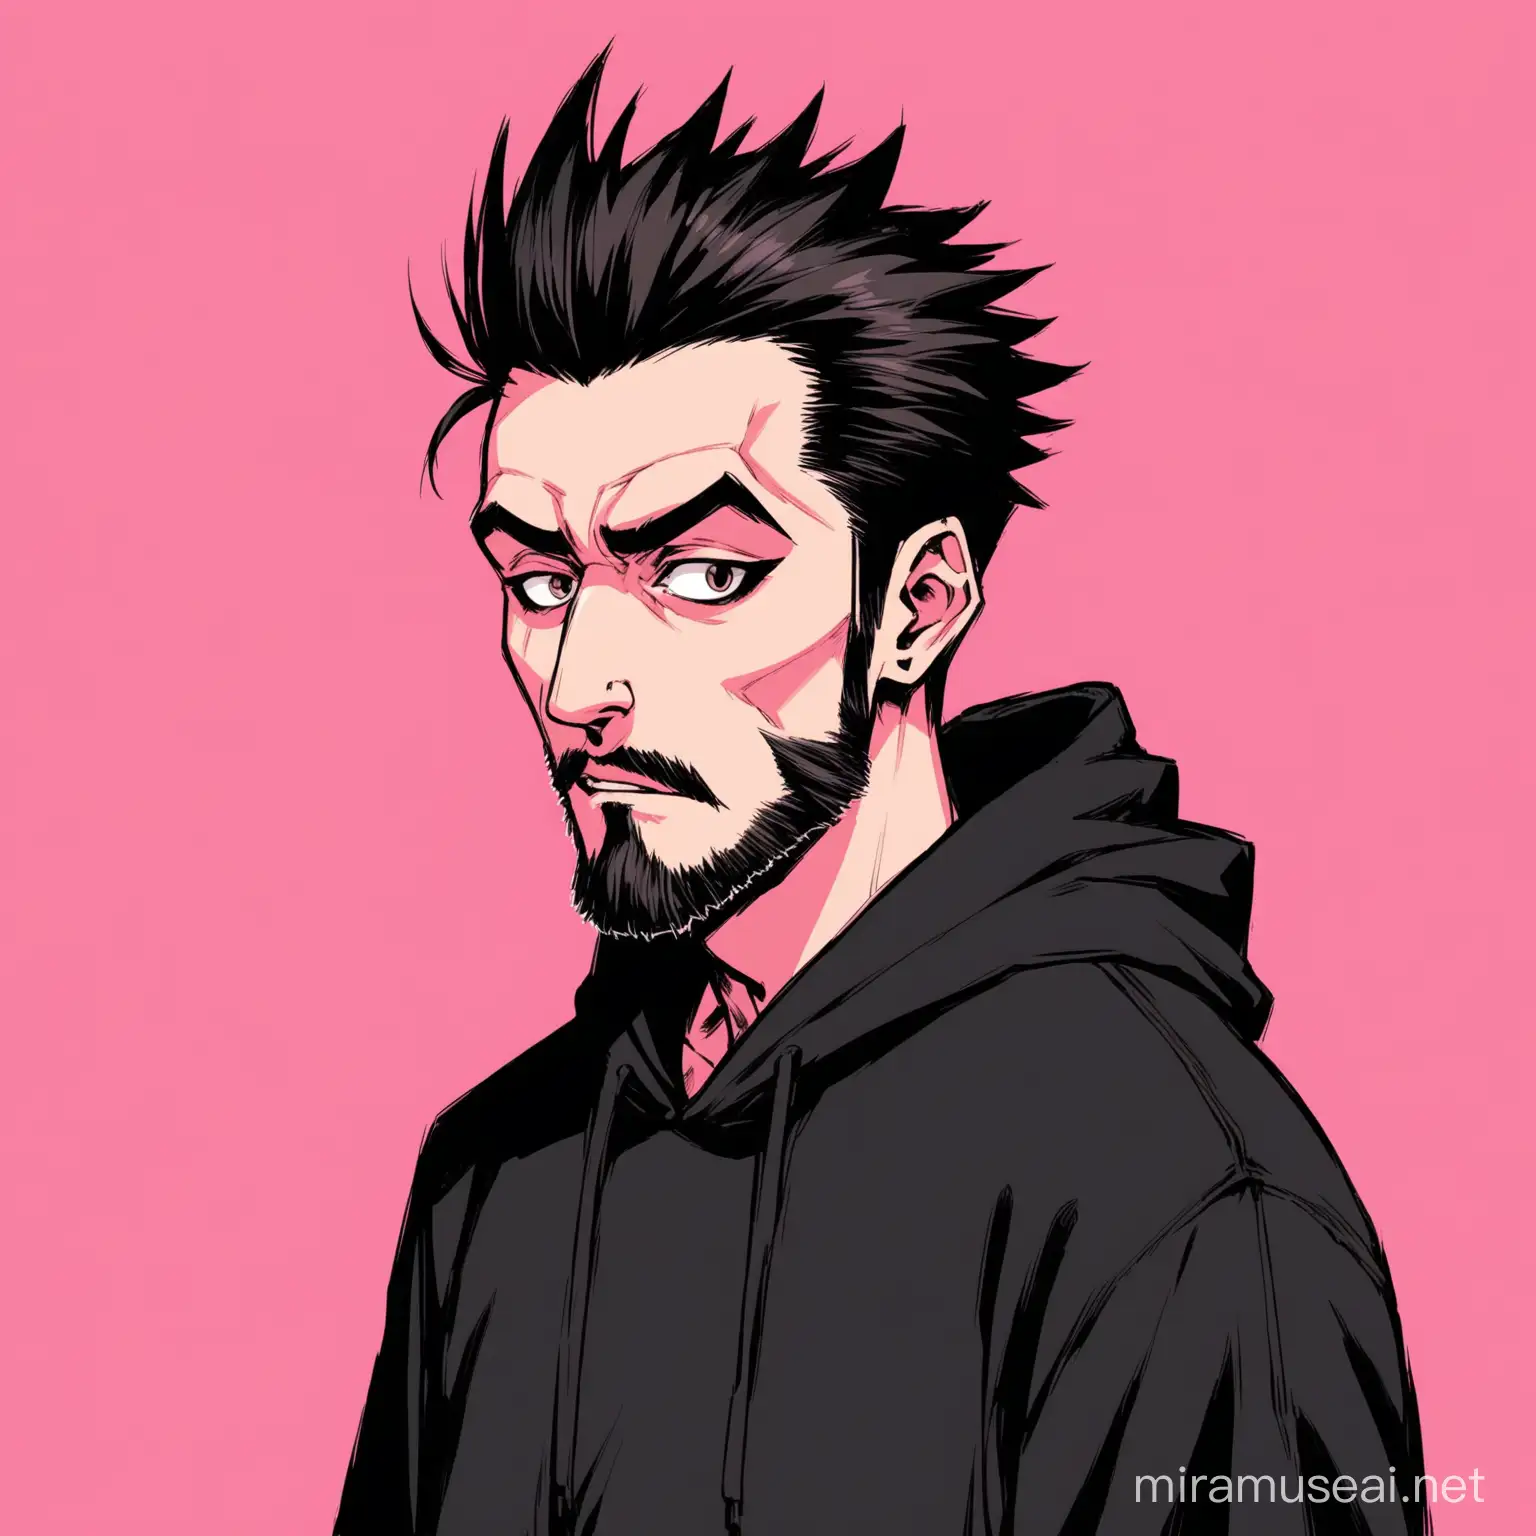 Stylish Hacker with Quiff Hair and Black Hoodie on Pink Background